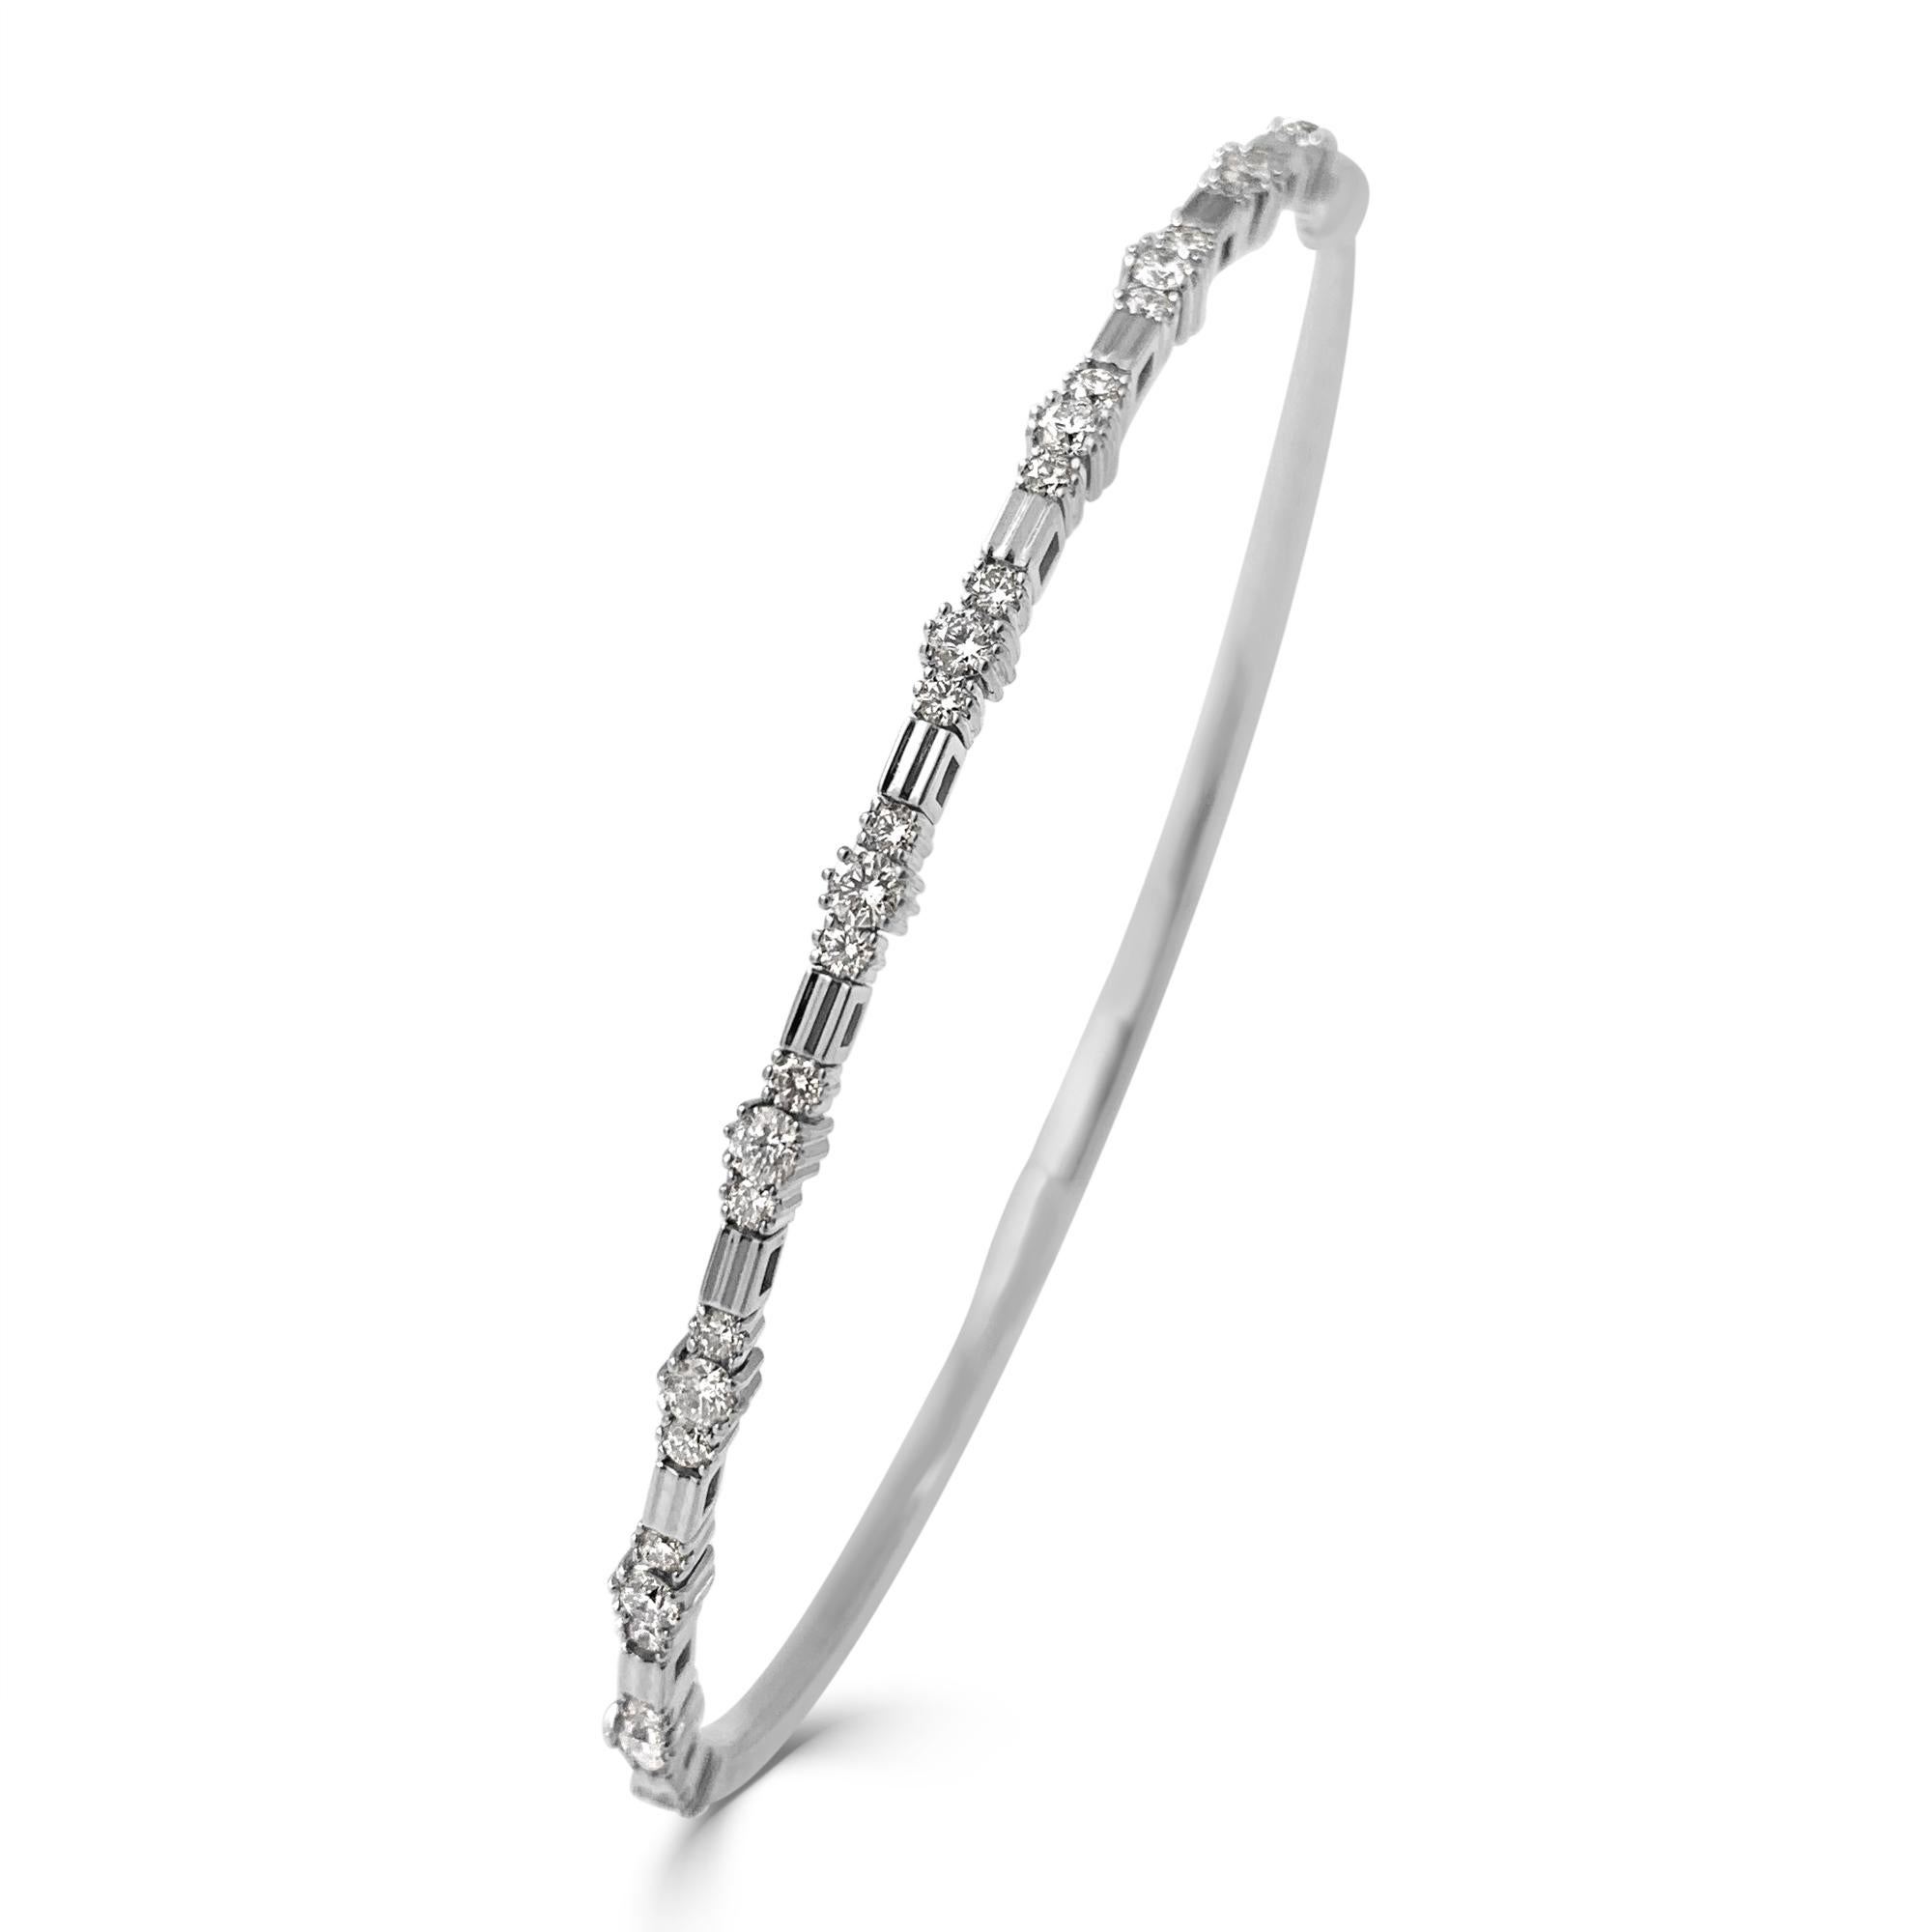  Quality Flexible Stackable Bangle: Made from real 14k gold and 76 glittering white approximately 3/4 cts. Certified diamonds, featuring a single row of white diamonds flexible diameter for comfort with a color and clarity of GH-SI
 Surprise Your